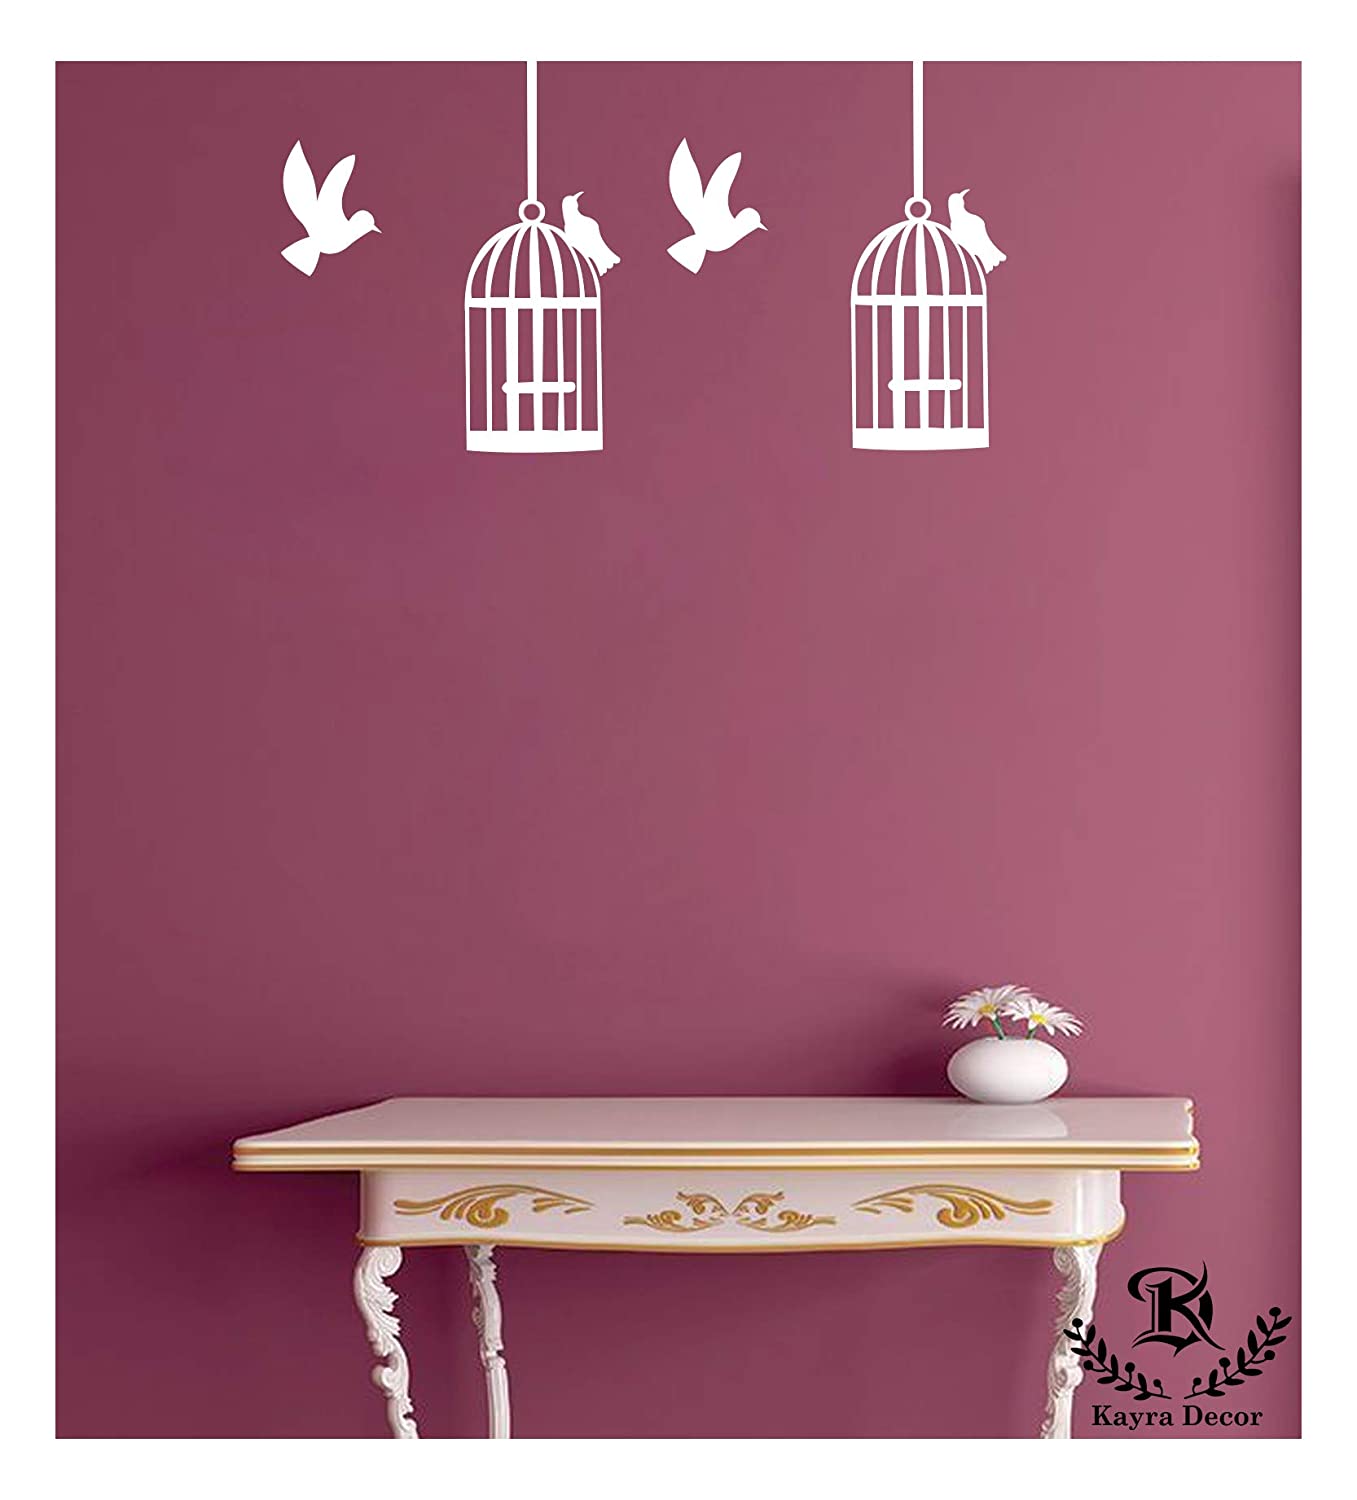 Birds and Cage Wall Design Stencil (KHS319)